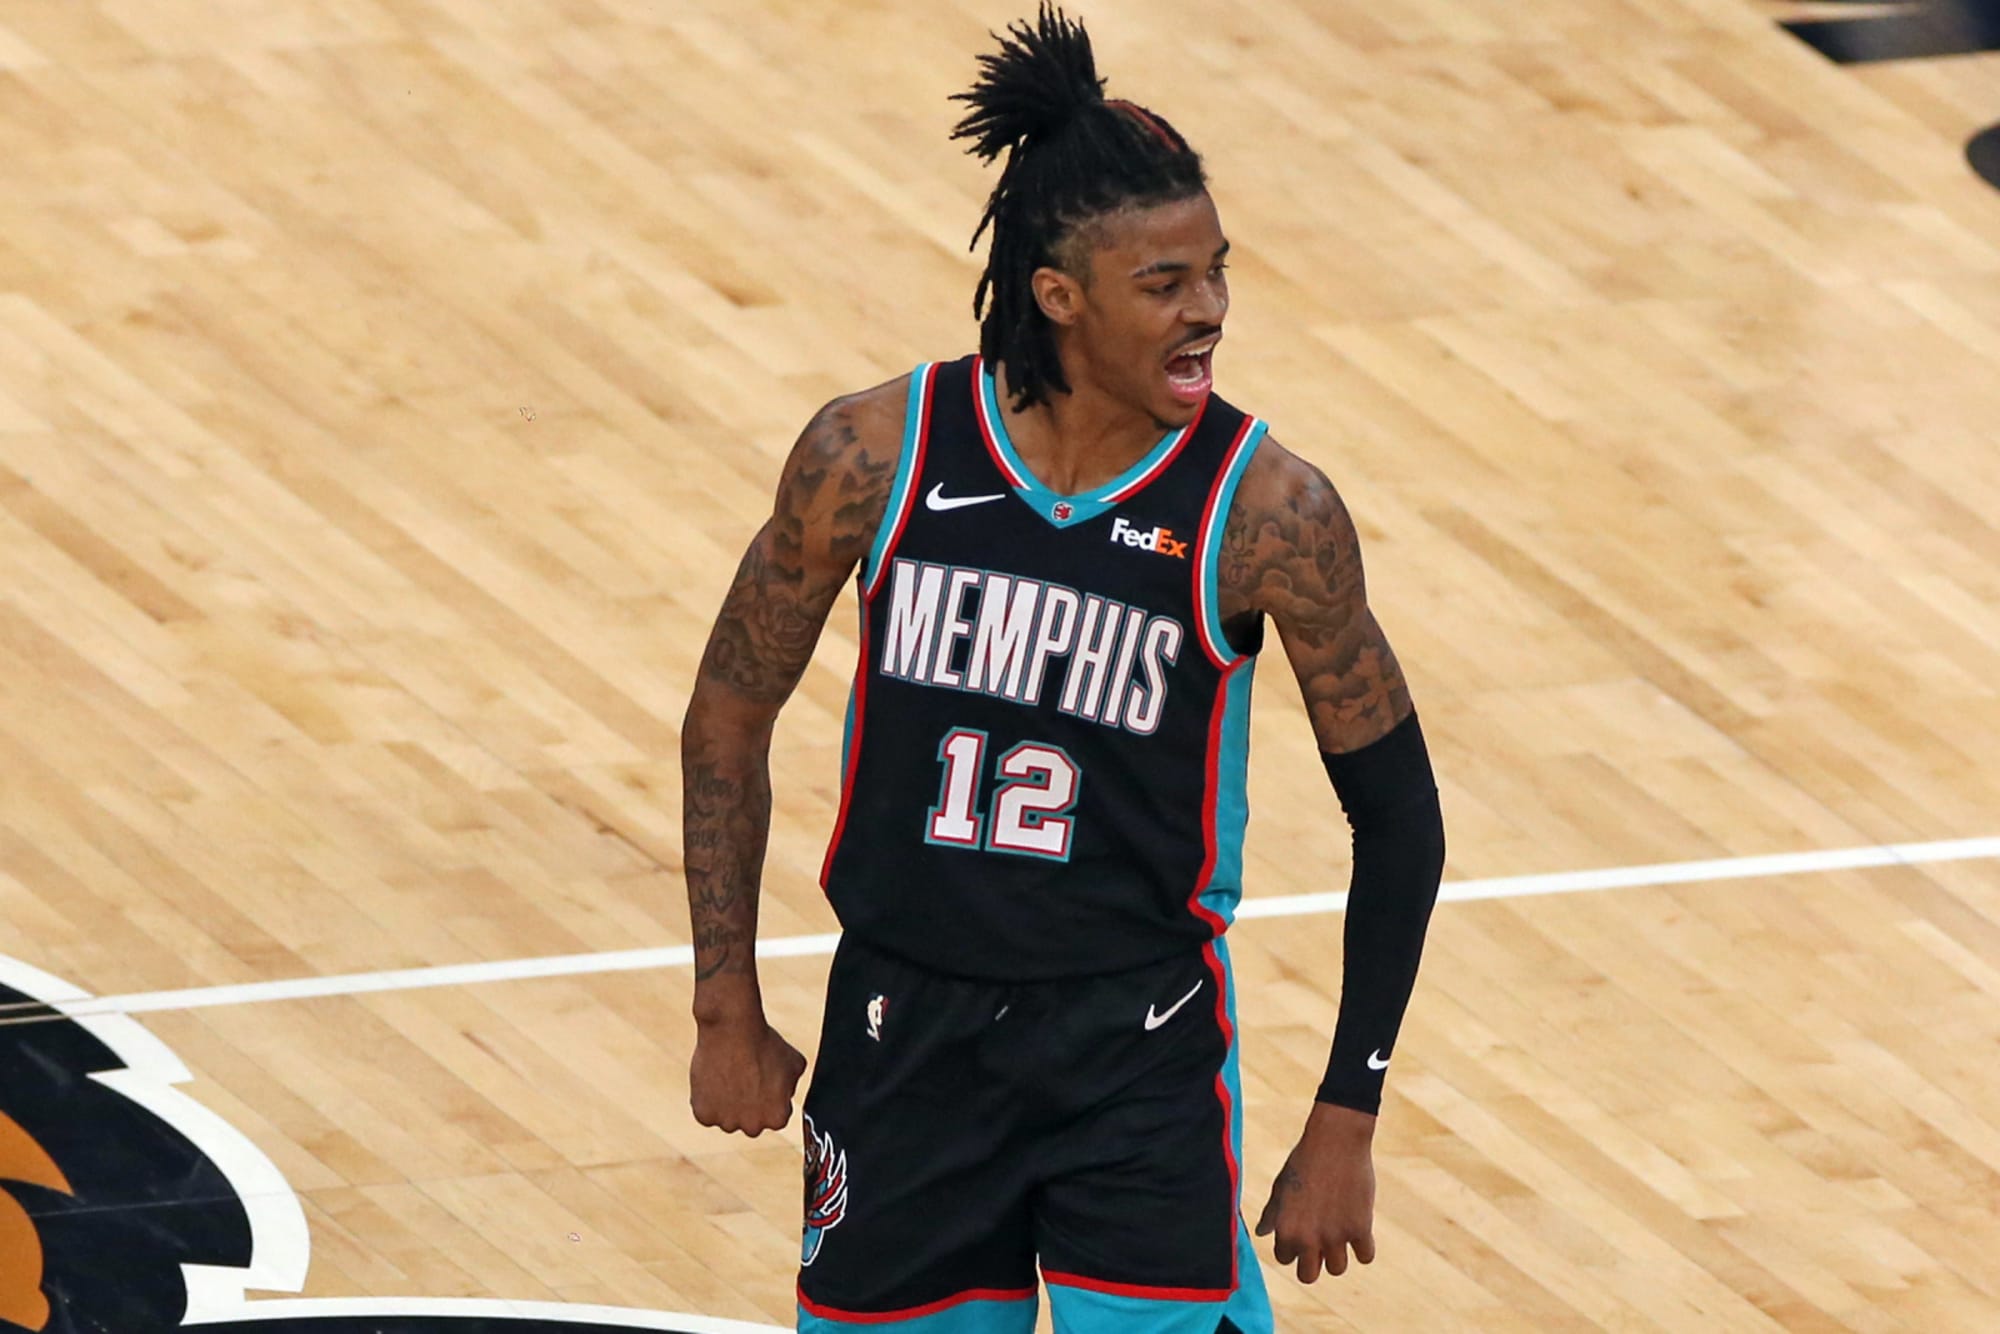 Jan. 16, 2021 – Ja Morant Game-Used and Photo-Matched Memphis